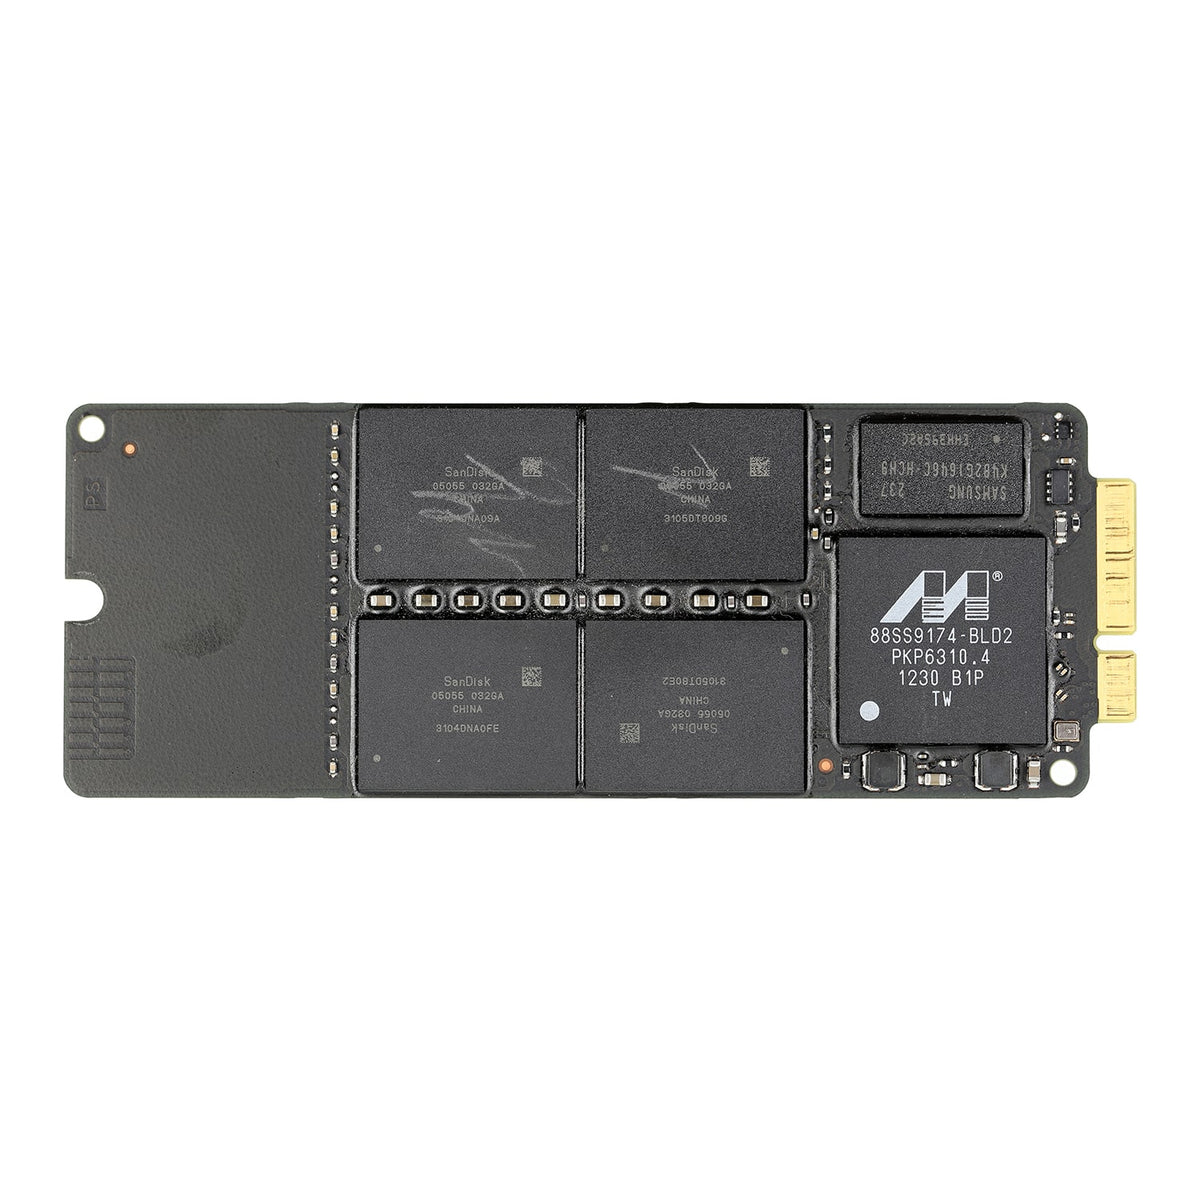 SOLID STATE DRIVE FOR MACBOOK PRO RETINA A1425 A1398 (MID 2012-EARLY 2013)